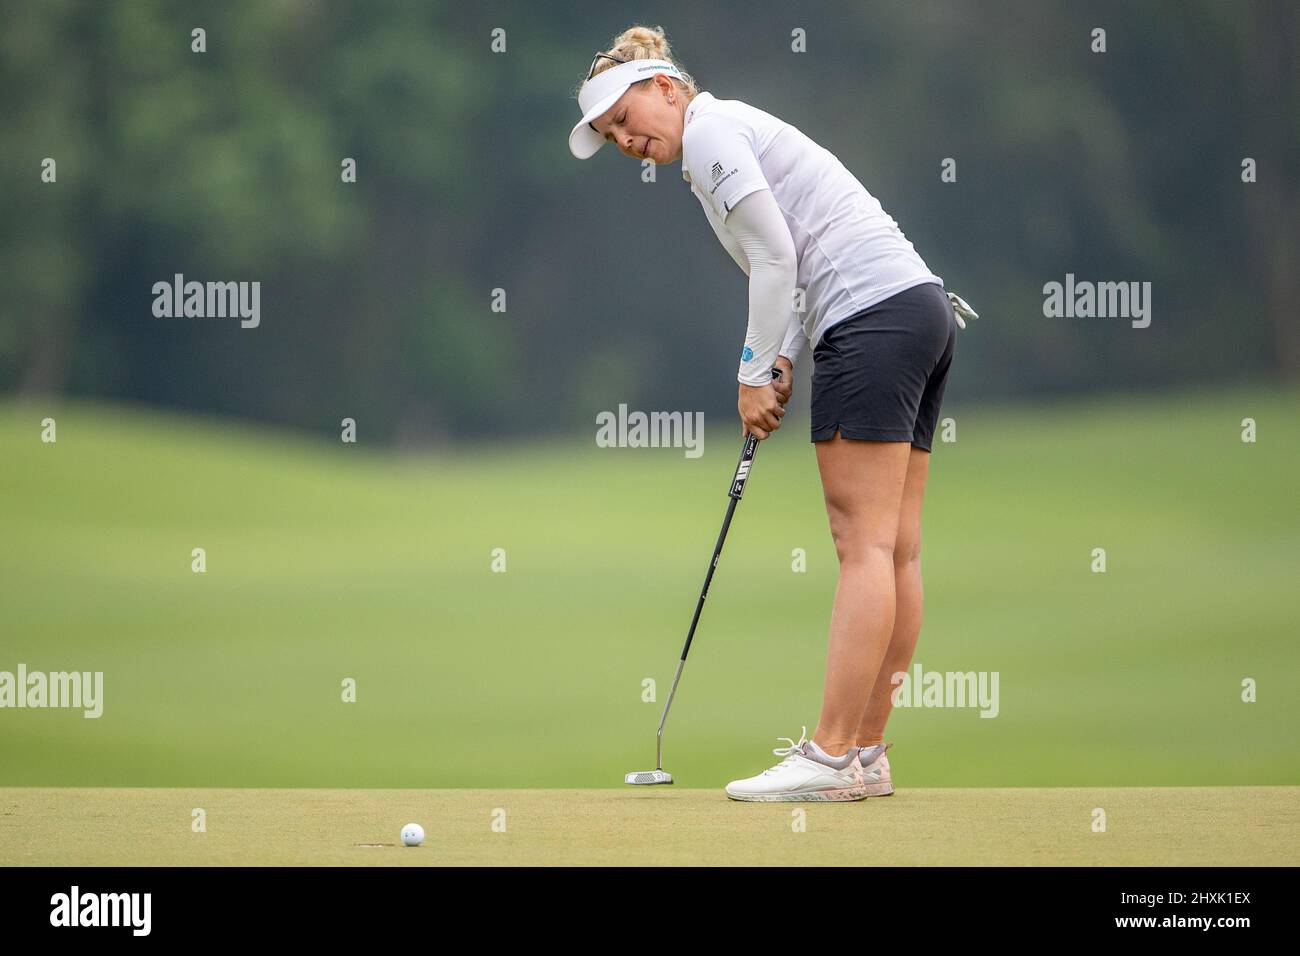 Pattaya Thailand - March 13:  Nanna Koerstz Madsen from Denmark in agony after missing a put to enter a play off on the 18th hole during the 4th and final day of The Honda LPGA Thailand at Siam Country Club Old Course on March 13, 2022 in Pattaya, Thailand (Photo by Peter van der Klooster/Orange Pictures) Stock Photo